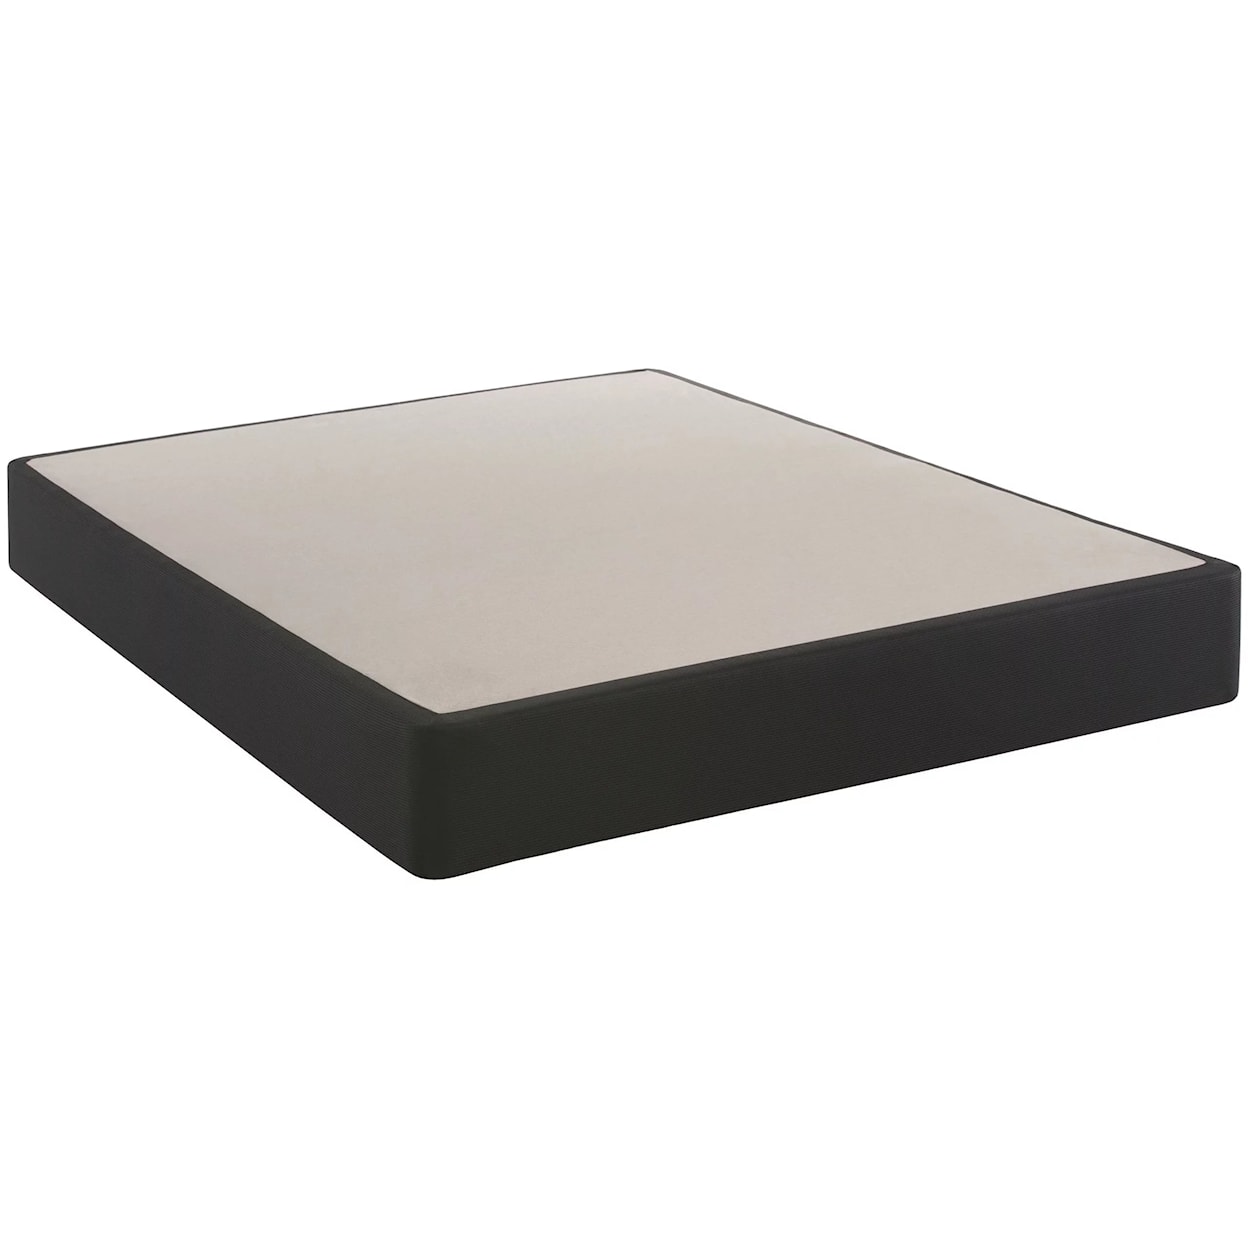 Justice Furniture Justice Bedding Foundations Twin Standard Base 9" Height